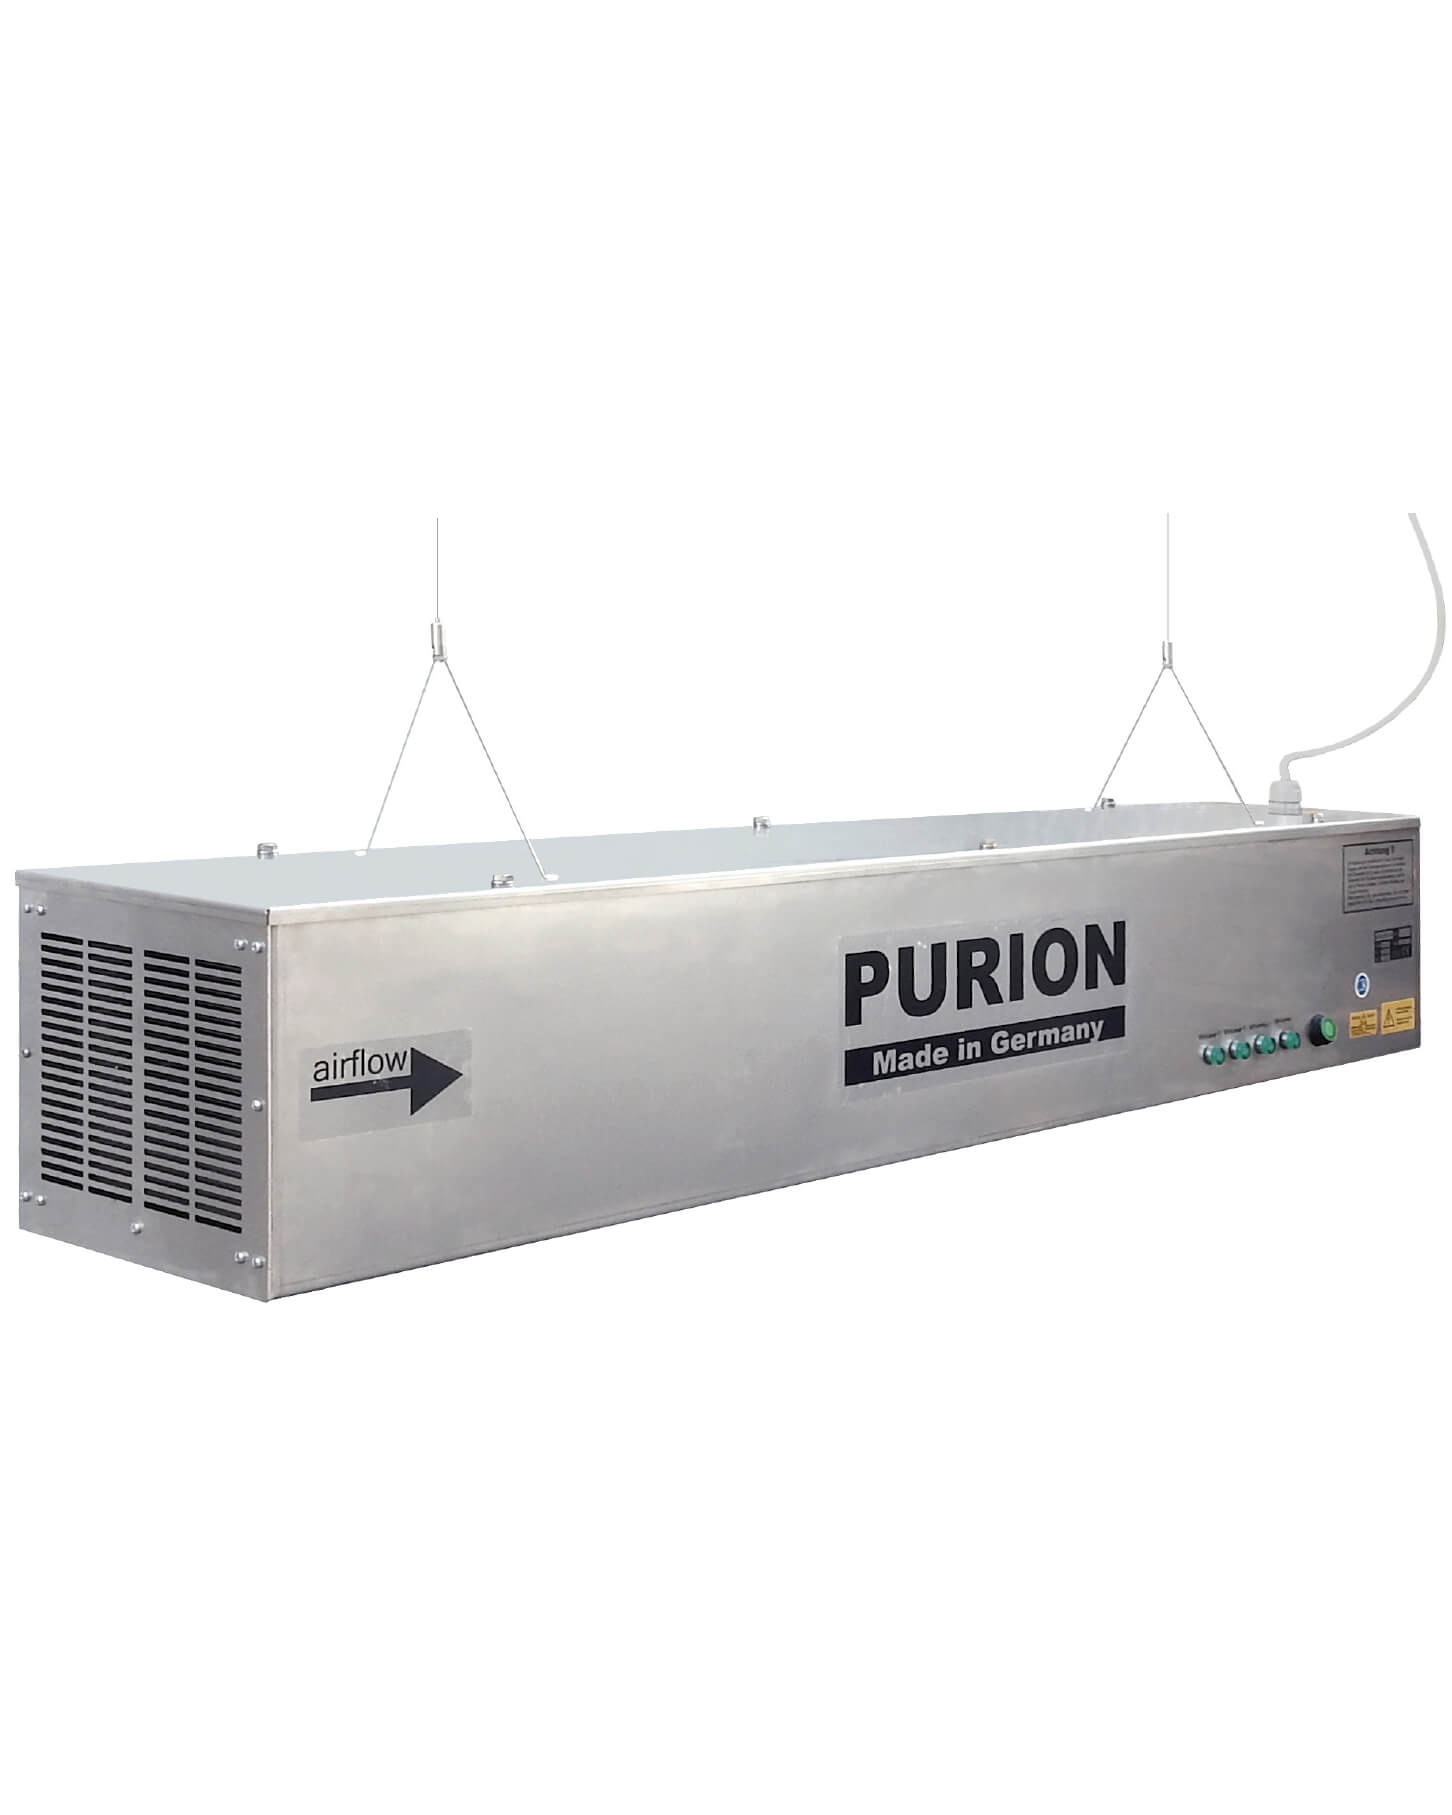 AIRPURION 400 active